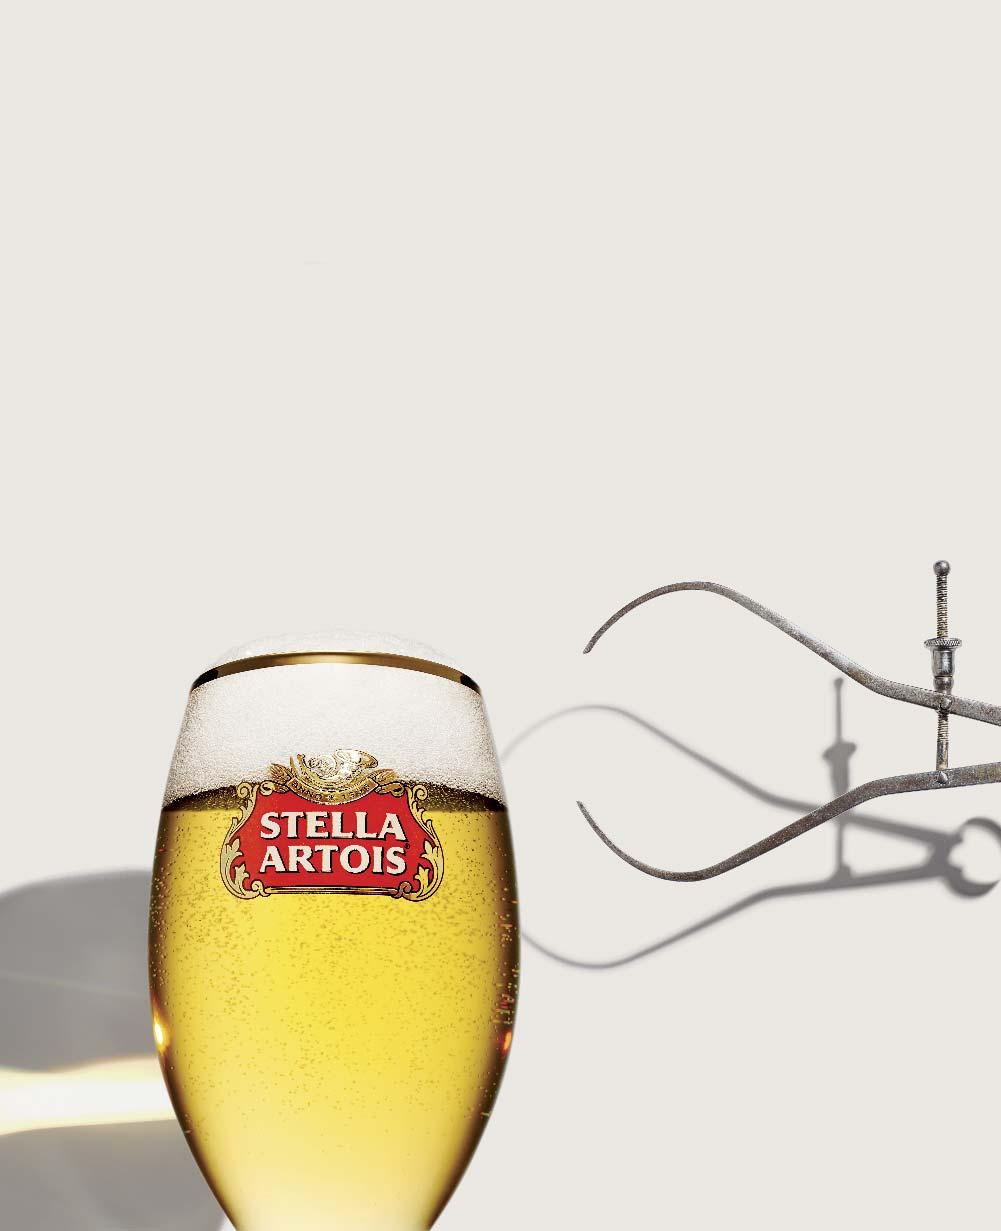 & Traditions Stella Artois Pouring Ritual Step : The Judgment The rich tradition of the brand is symbolized by the beautiful Stella Artois chalice, along with an exacting Belgian pouring ritual that